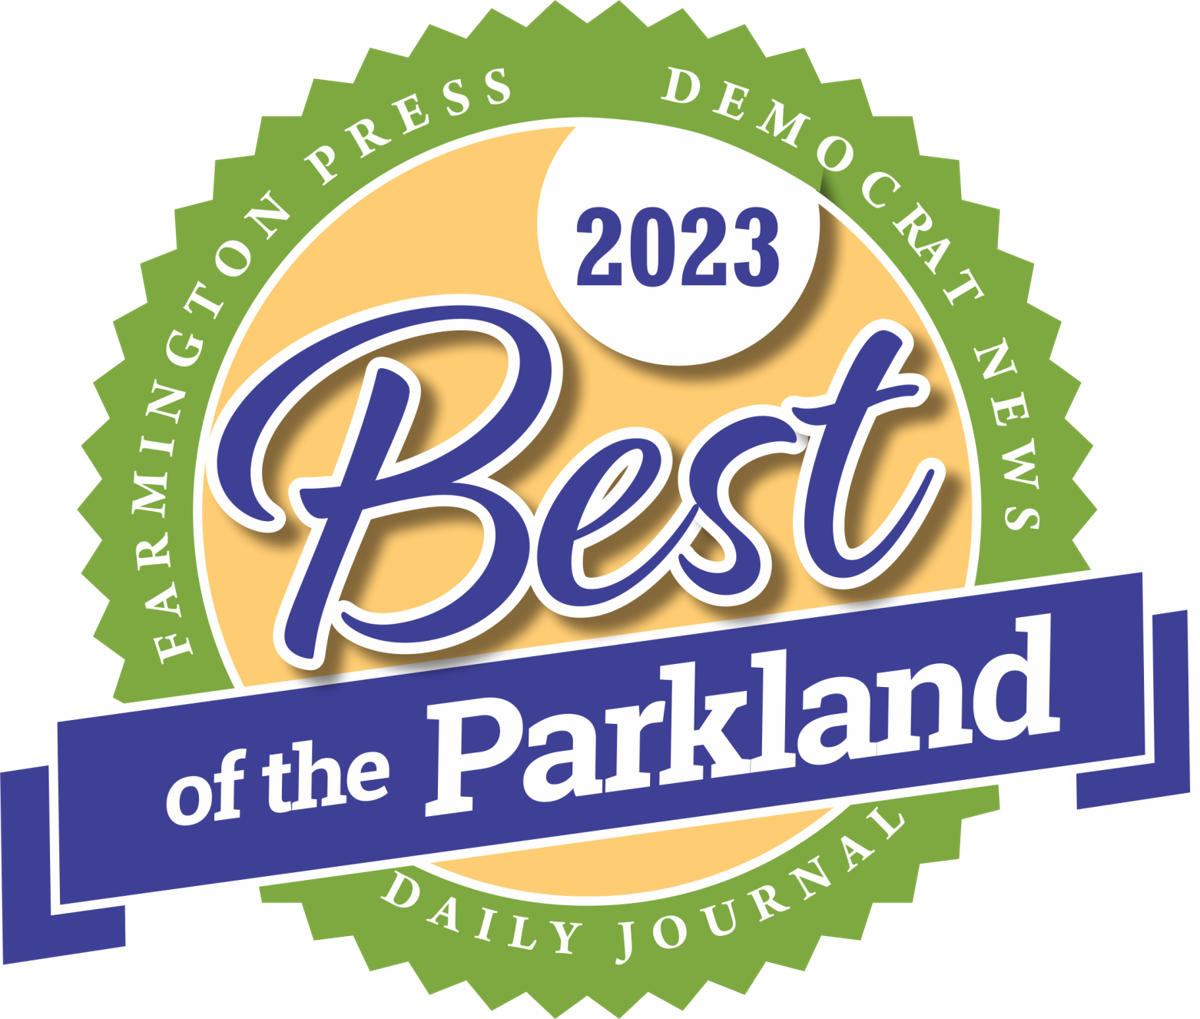 graphic logo for winner of best of the parkland 2023